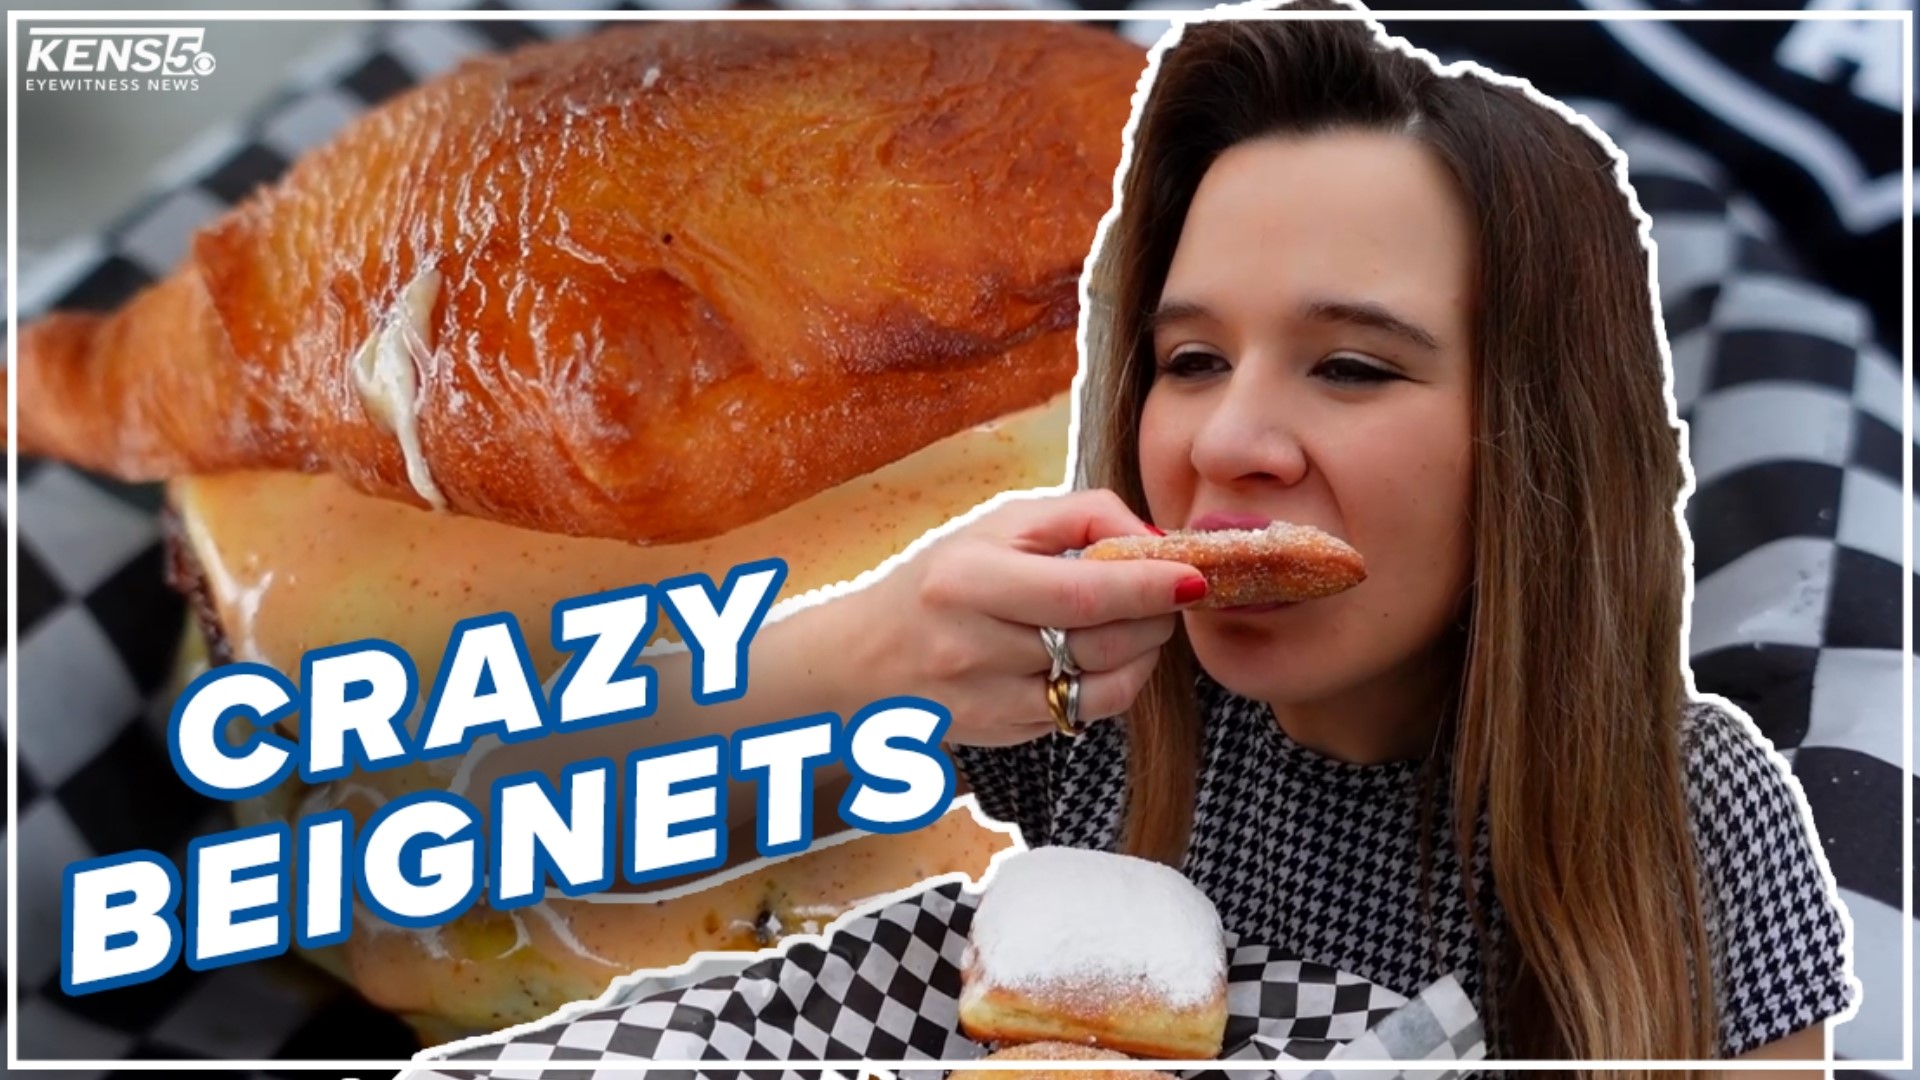 The Beignet Stand has gained a loyal following. And Lexi Hazlett stopped by to visit with them on this week's Neighborhood Eats.